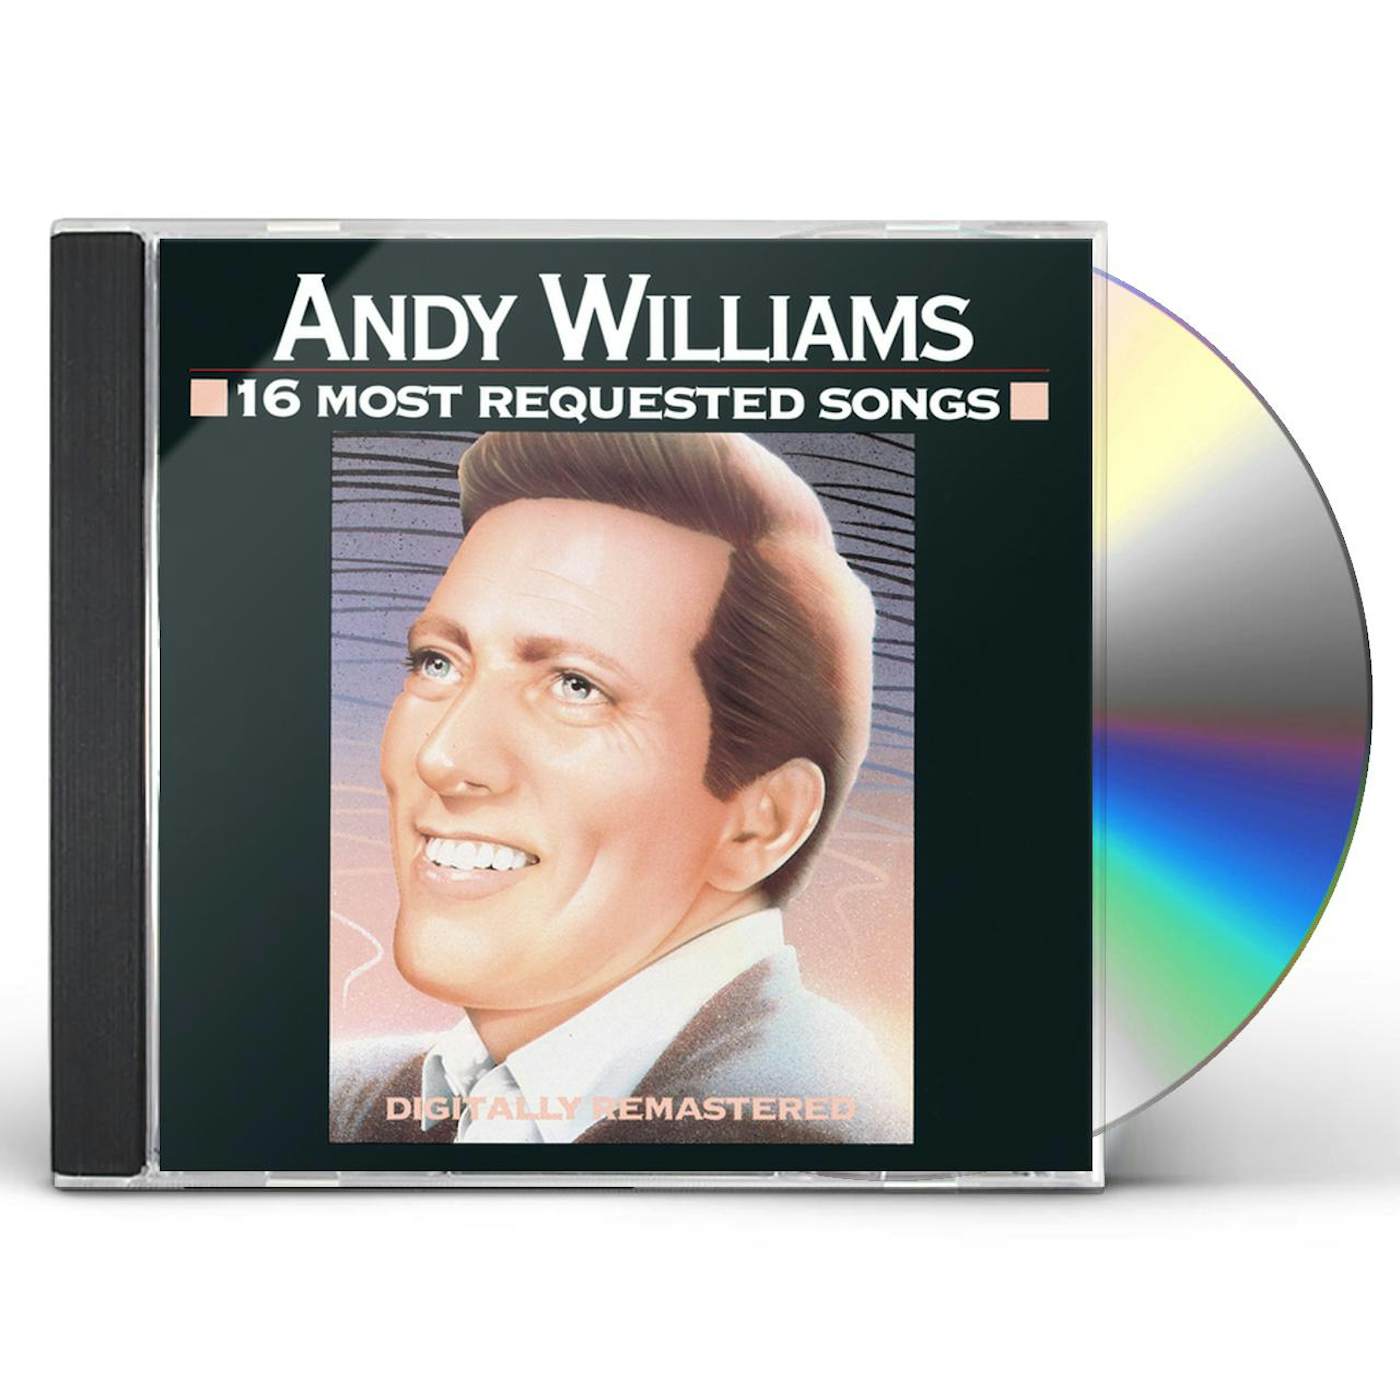 Andy Williams 16 MOST REQUESTED SONGS CD